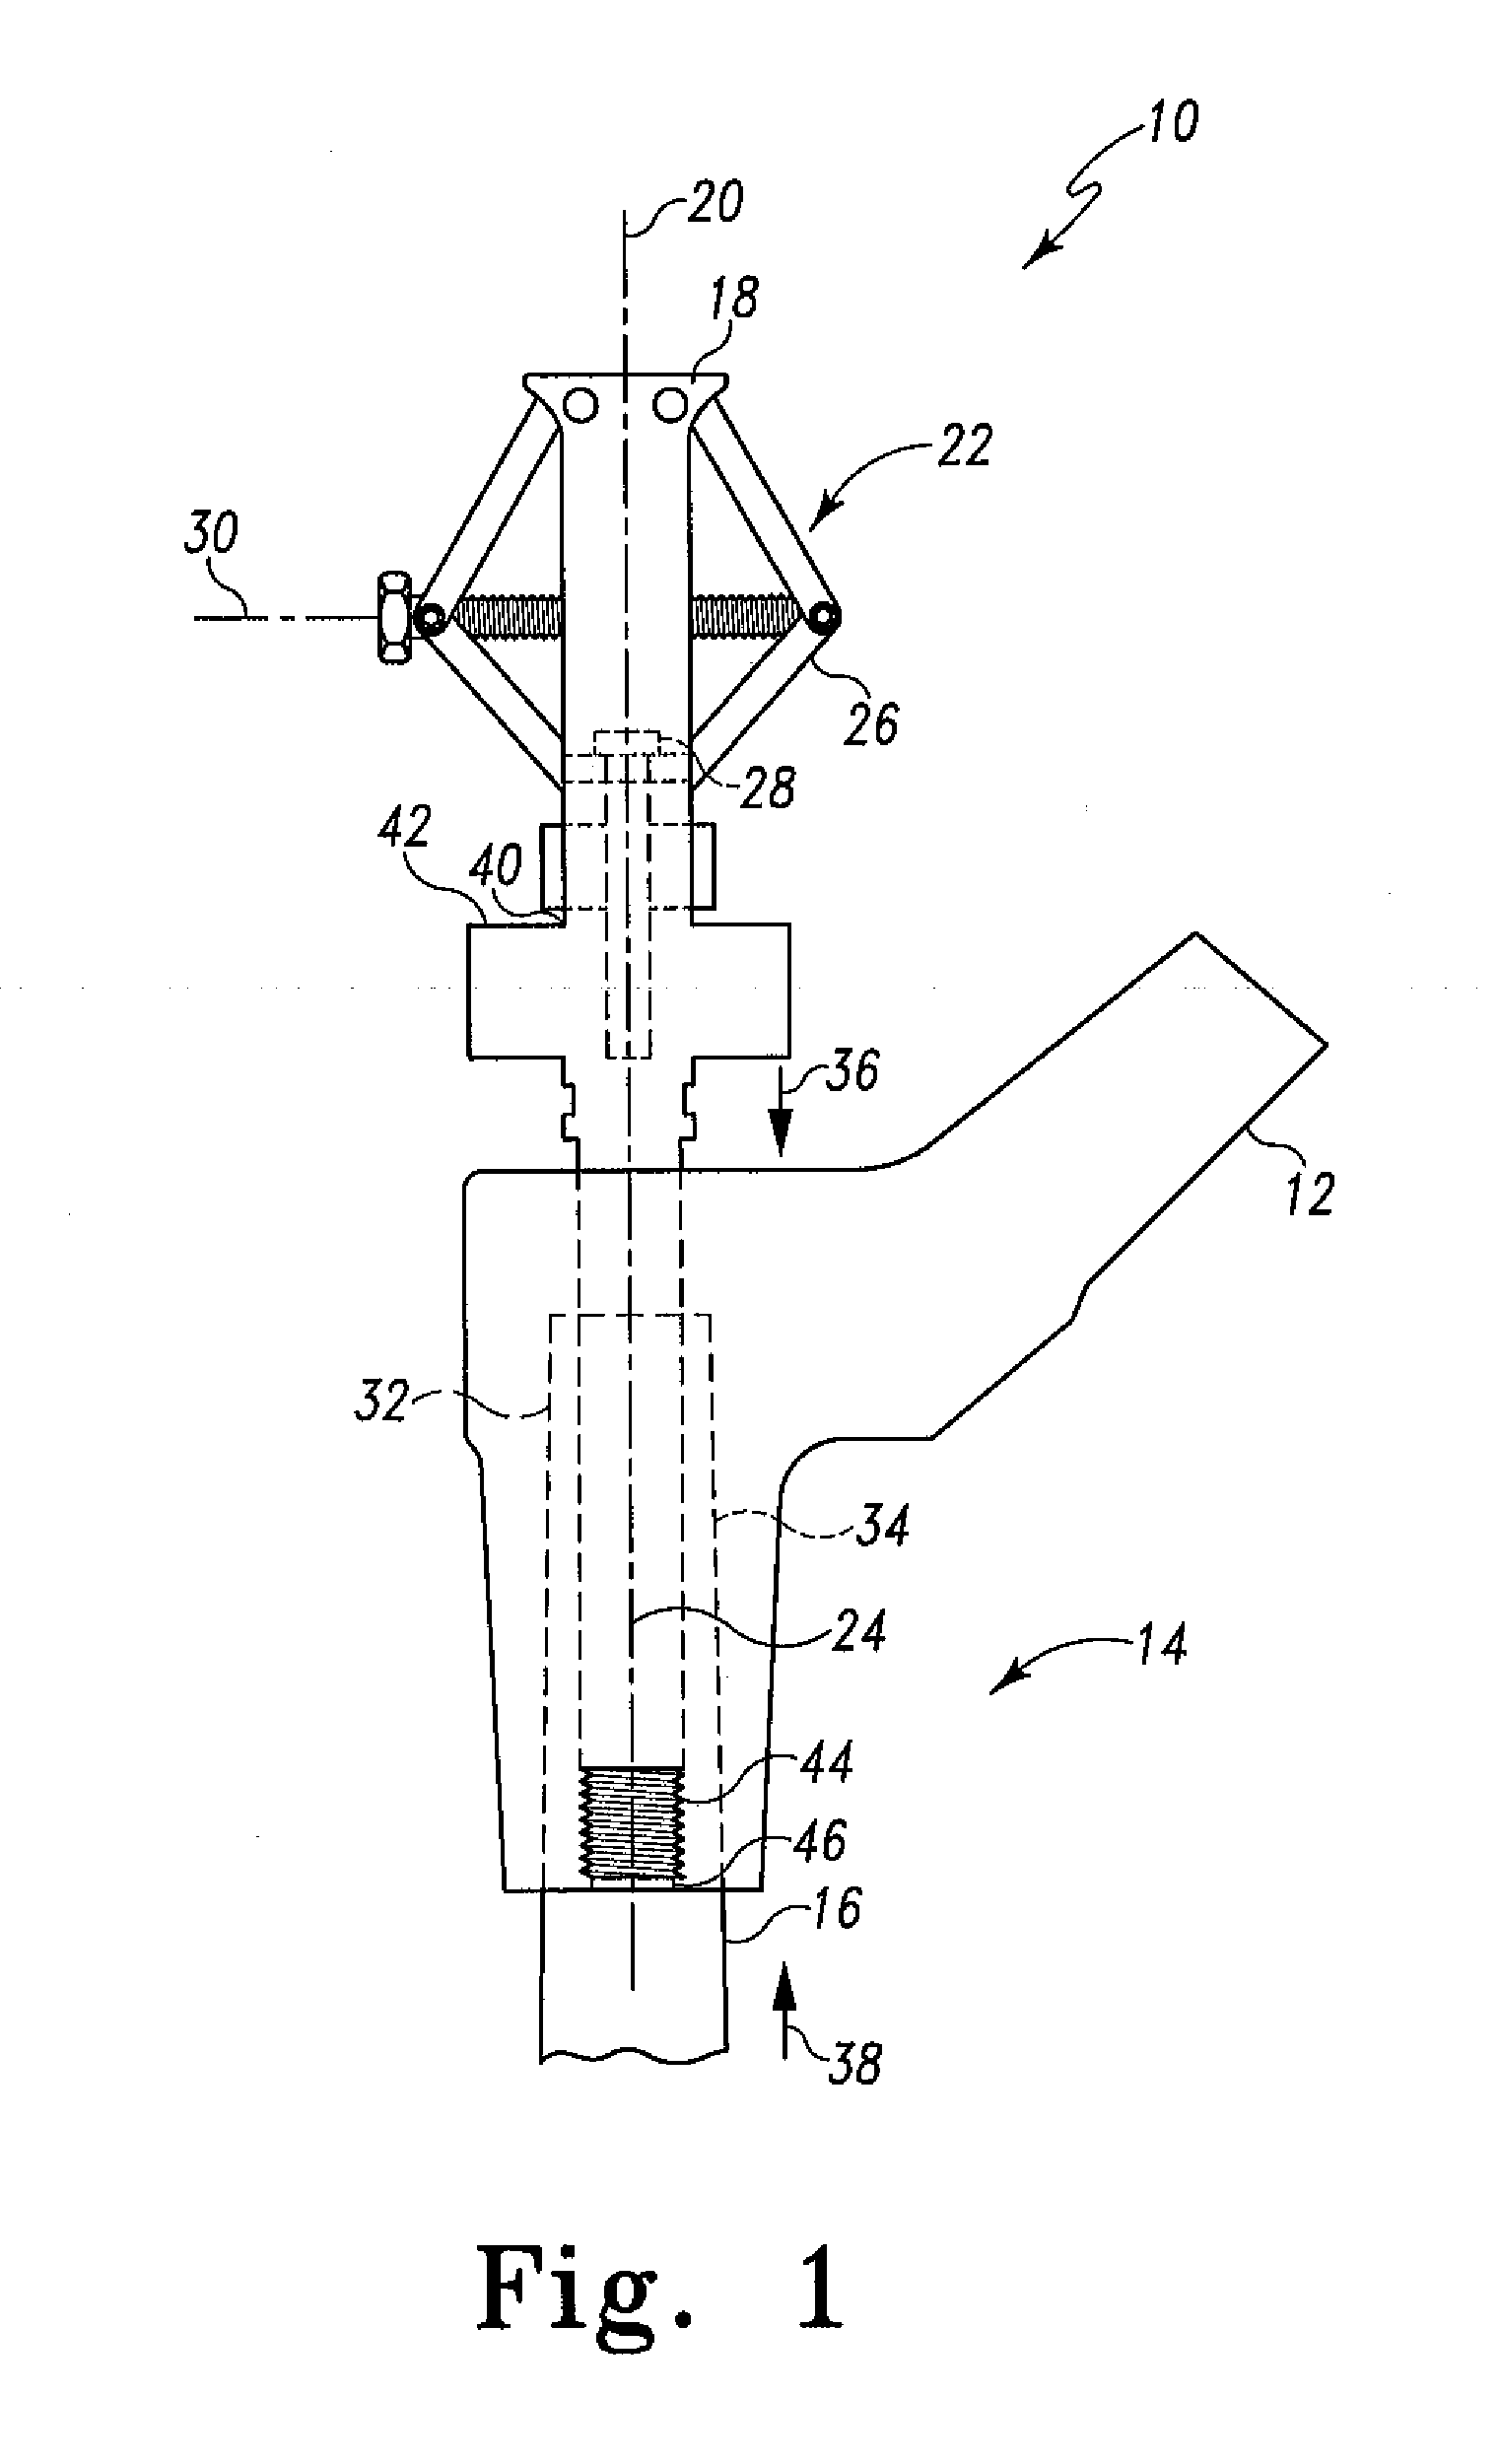 Modular taper assembly device